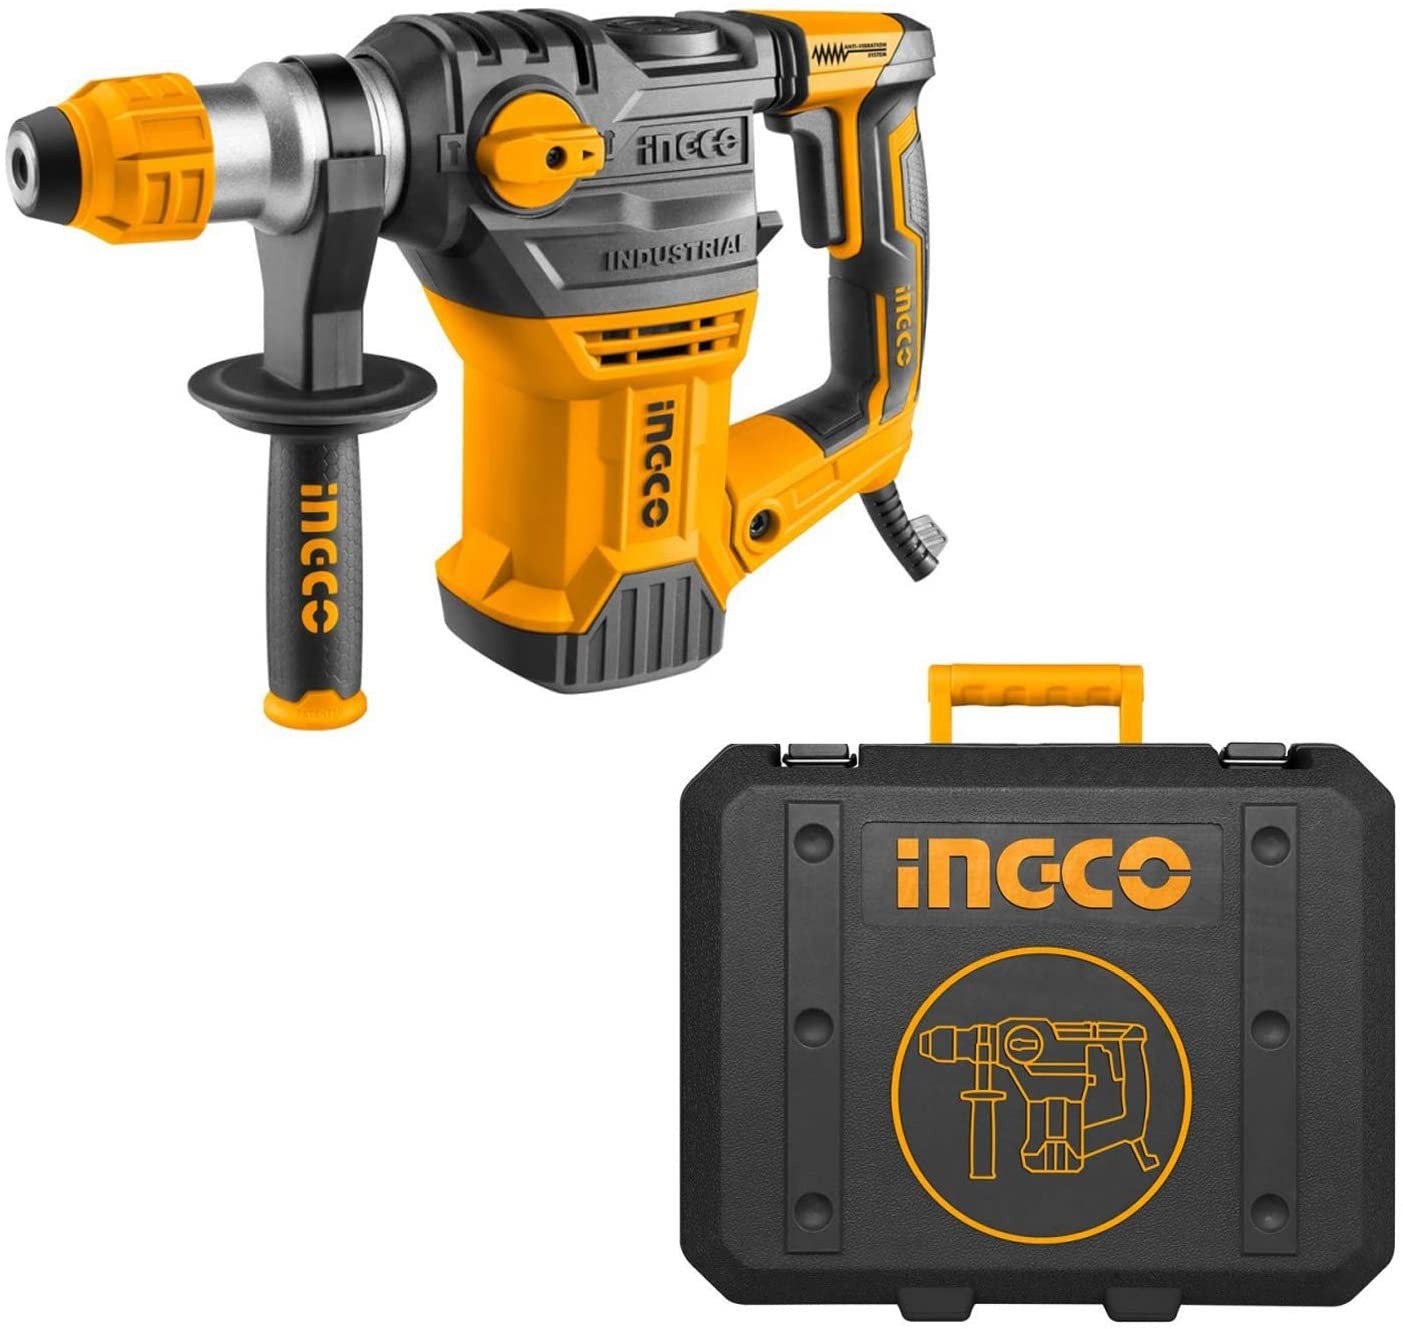 Ingco Heavy Duty Rotary Hammer Drill with SDS plus 1500W - RH150028 | Supply Master | Accra, Ghana Tools Building Steel Engineering Hardware tool